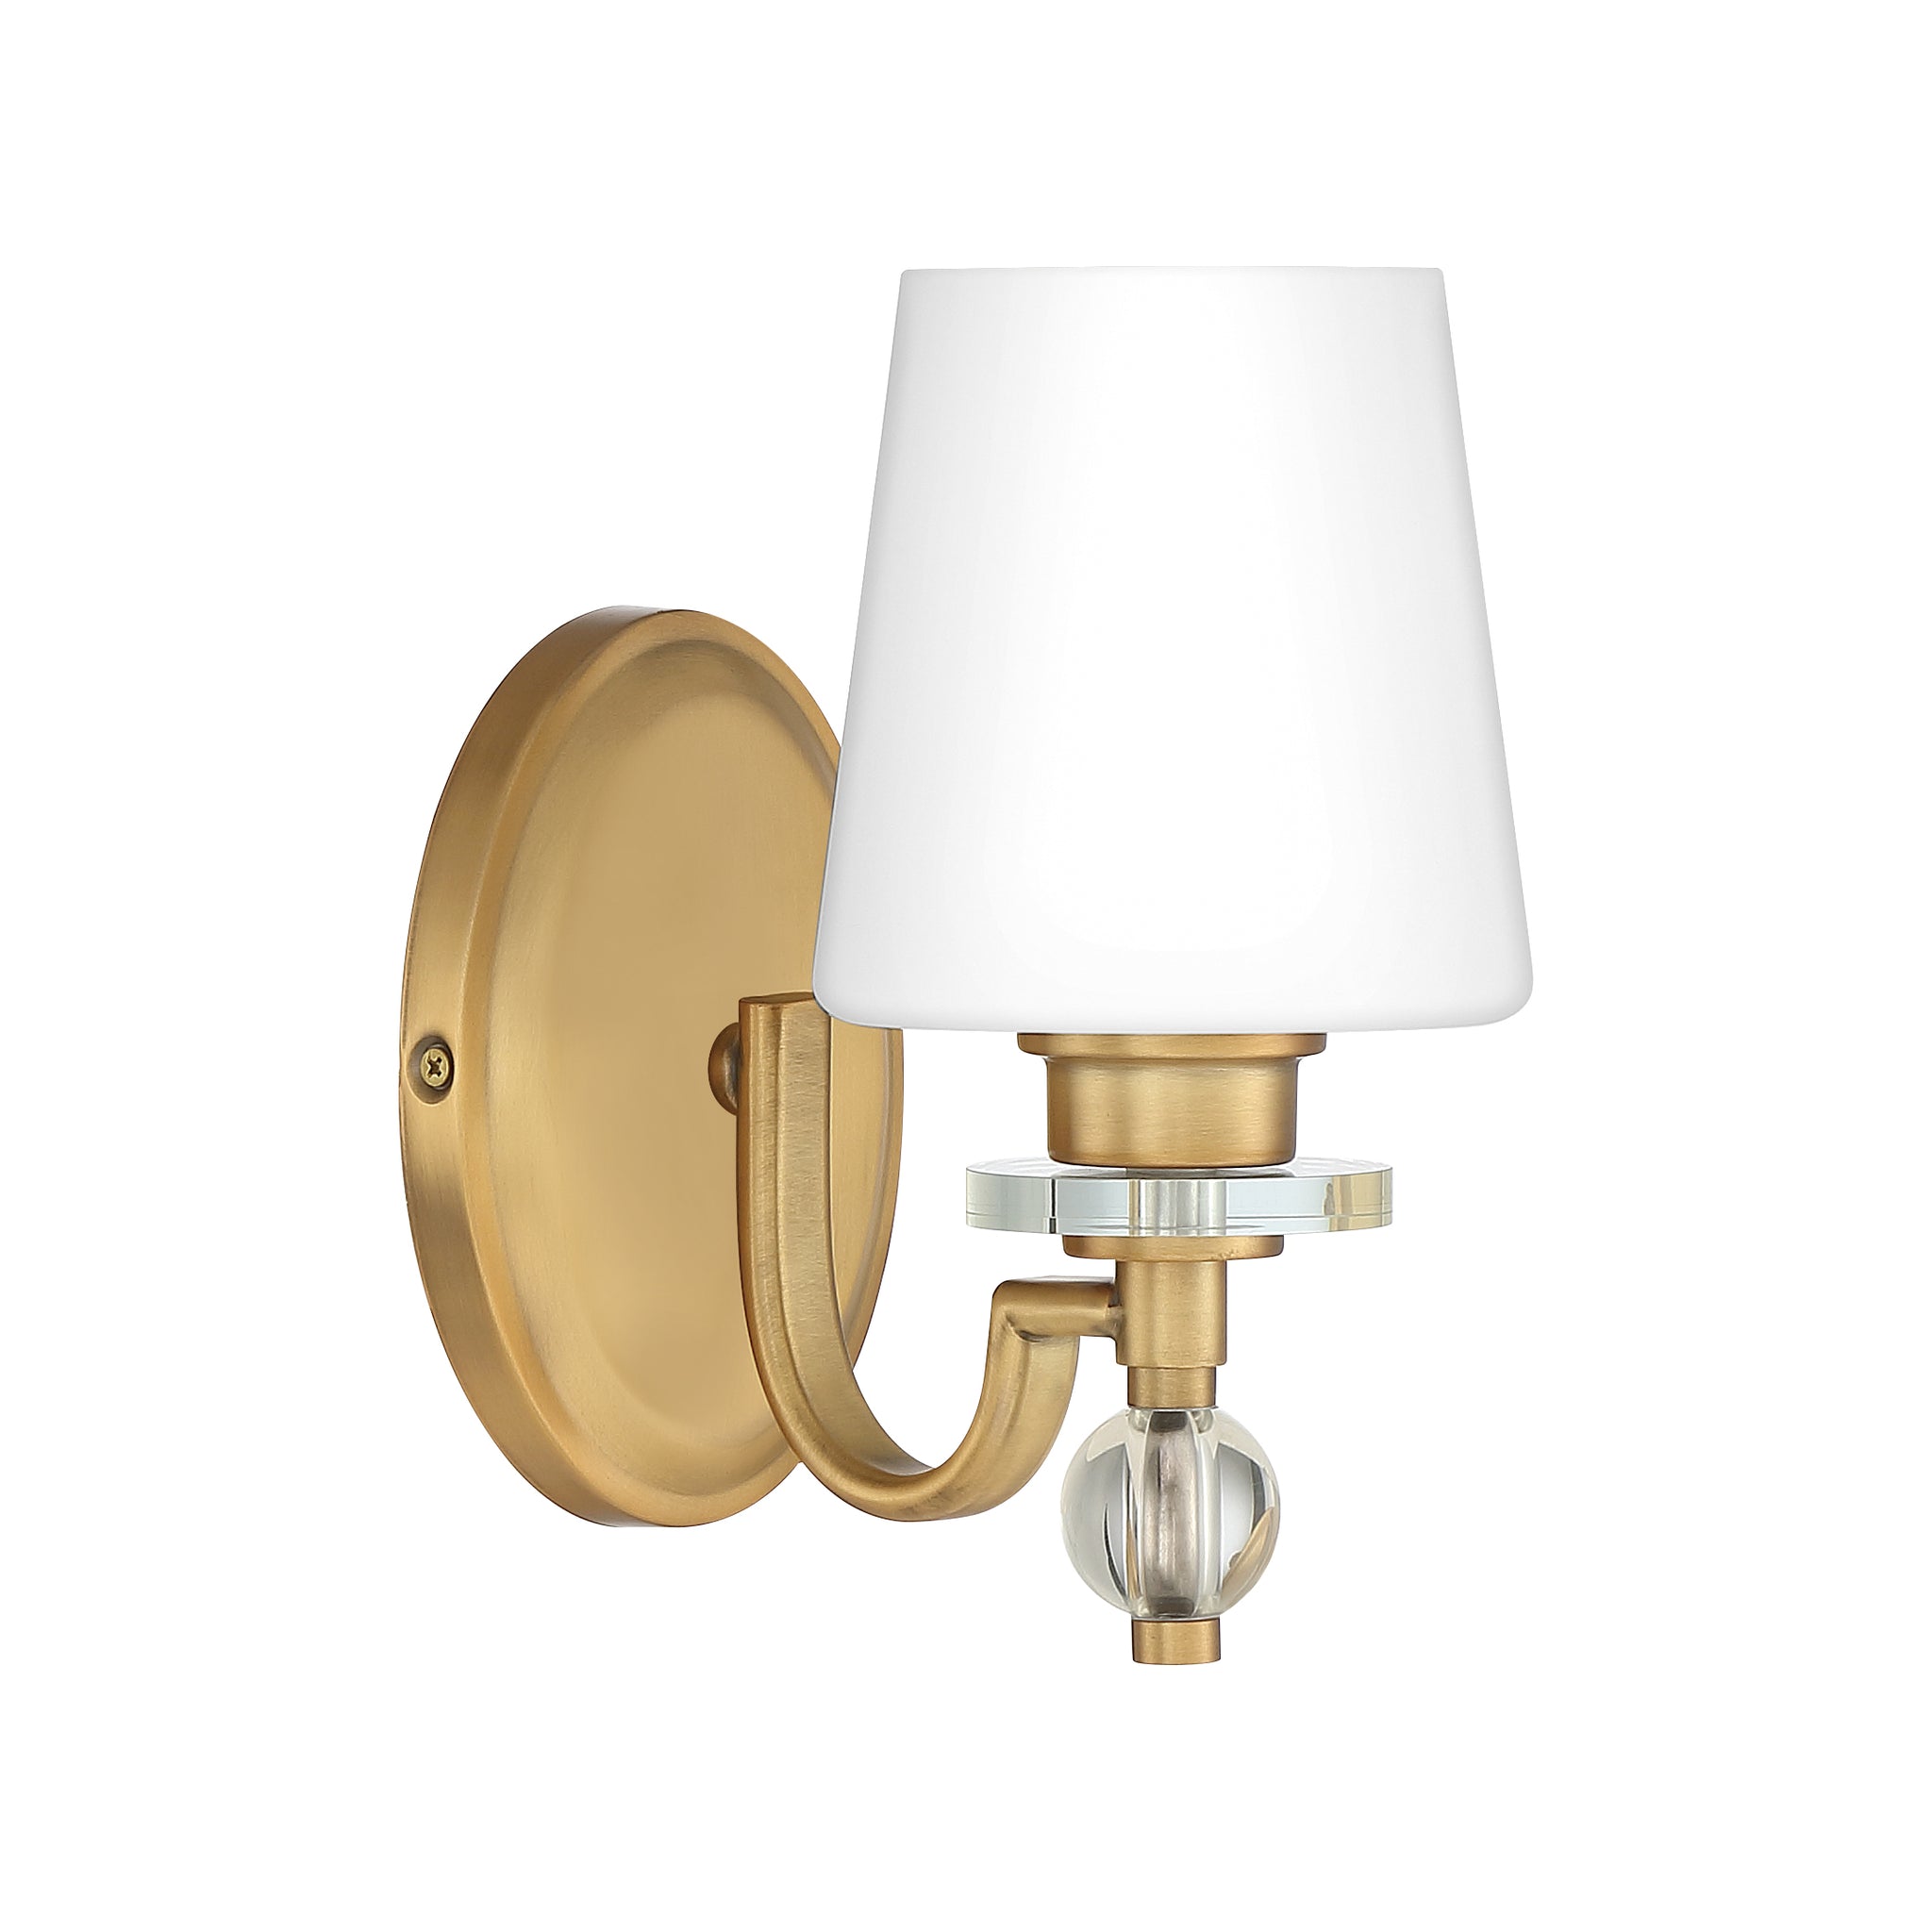 Hollister Sconce Weathered Brass